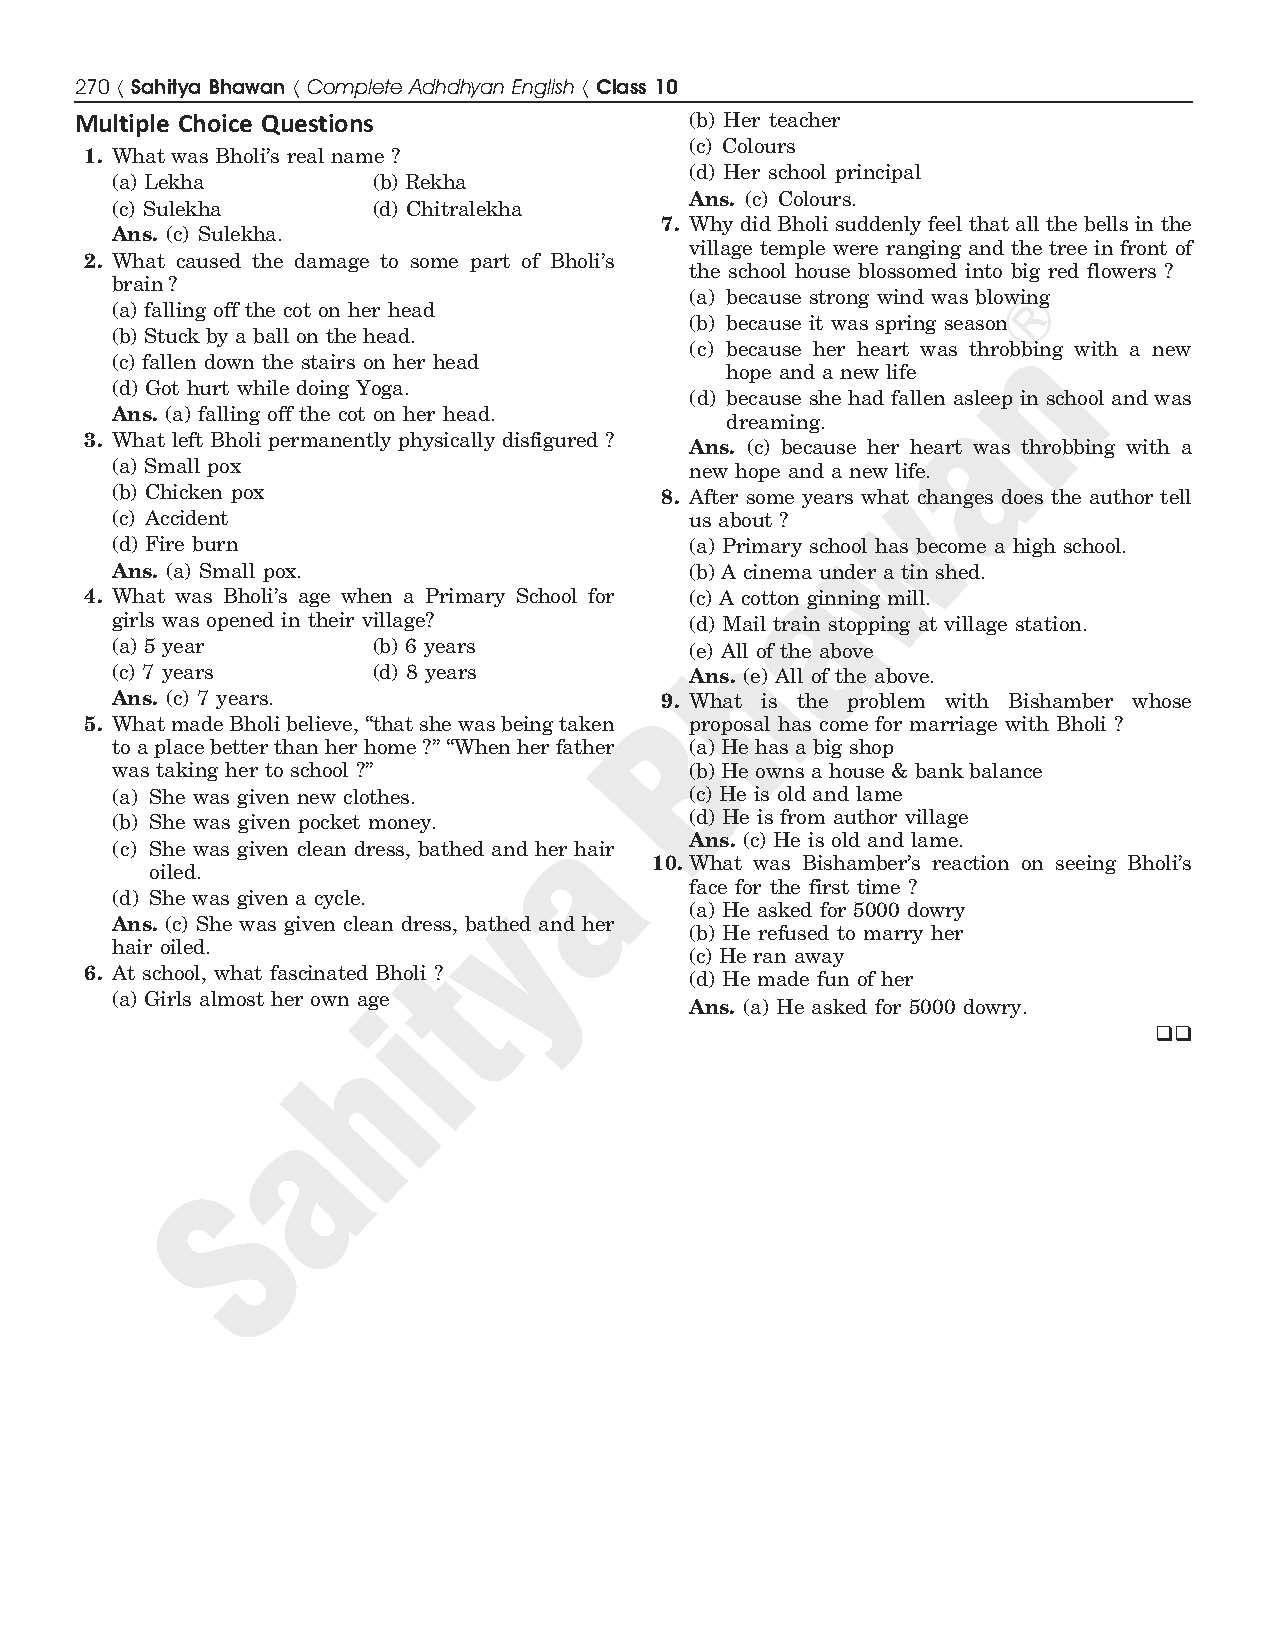 Fire and Ice: NCERT MCQ Class 10 English Poem 2